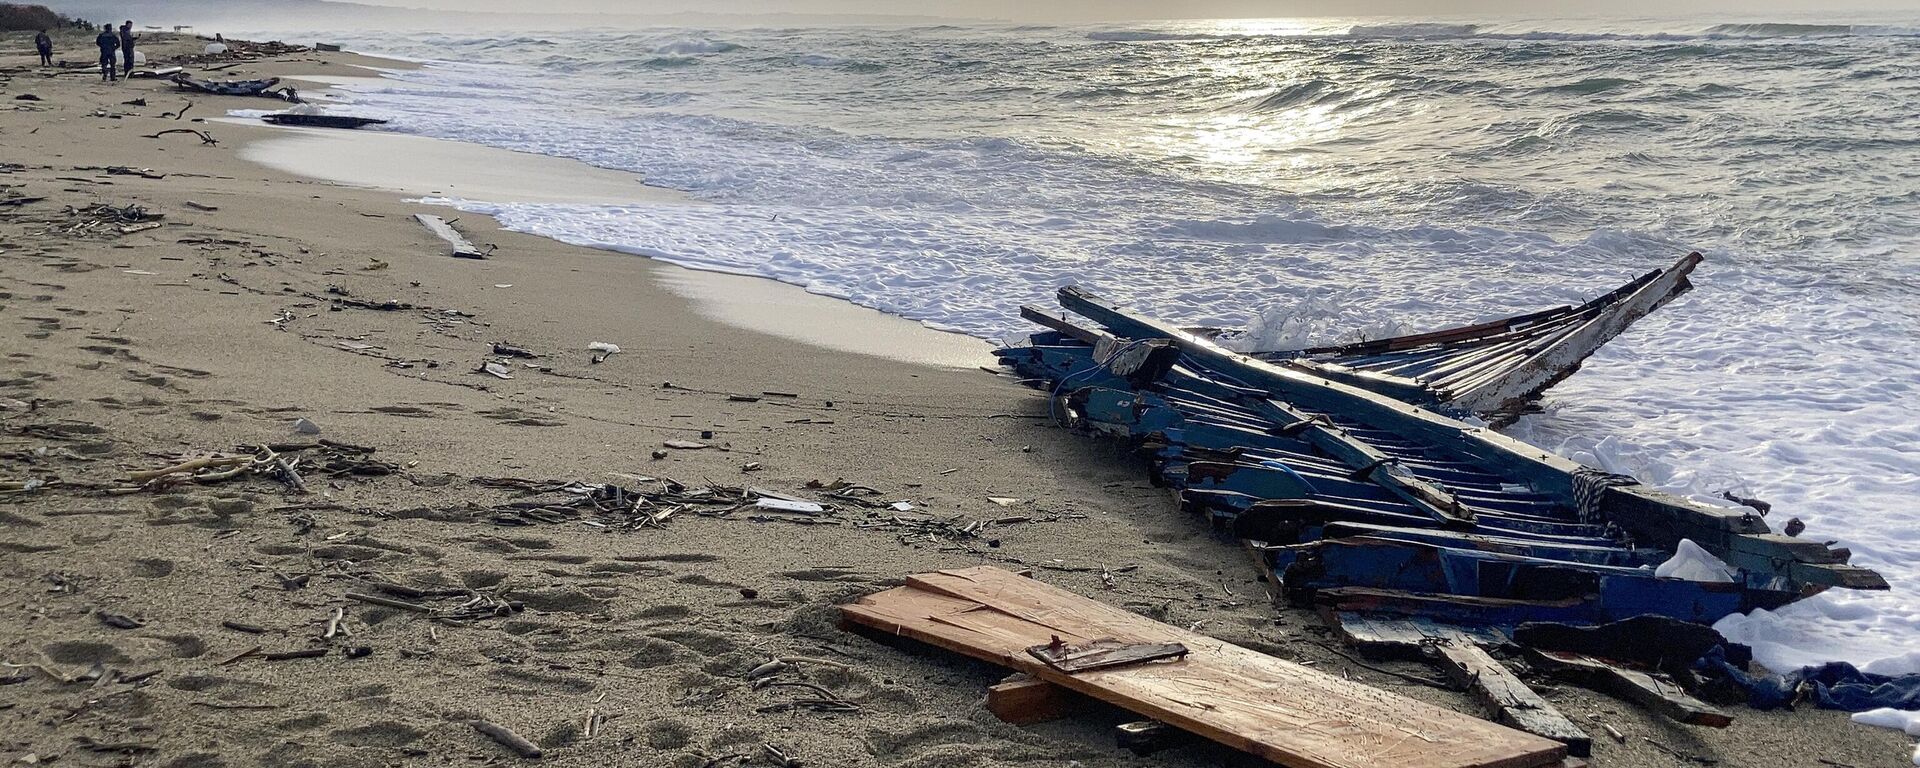 Wreckage of a capsized boat washed ashore at a beach near Cutro, southern Italy, Monday, Feb. 27, 2023. - Sputnik International, 1920, 01.03.2023